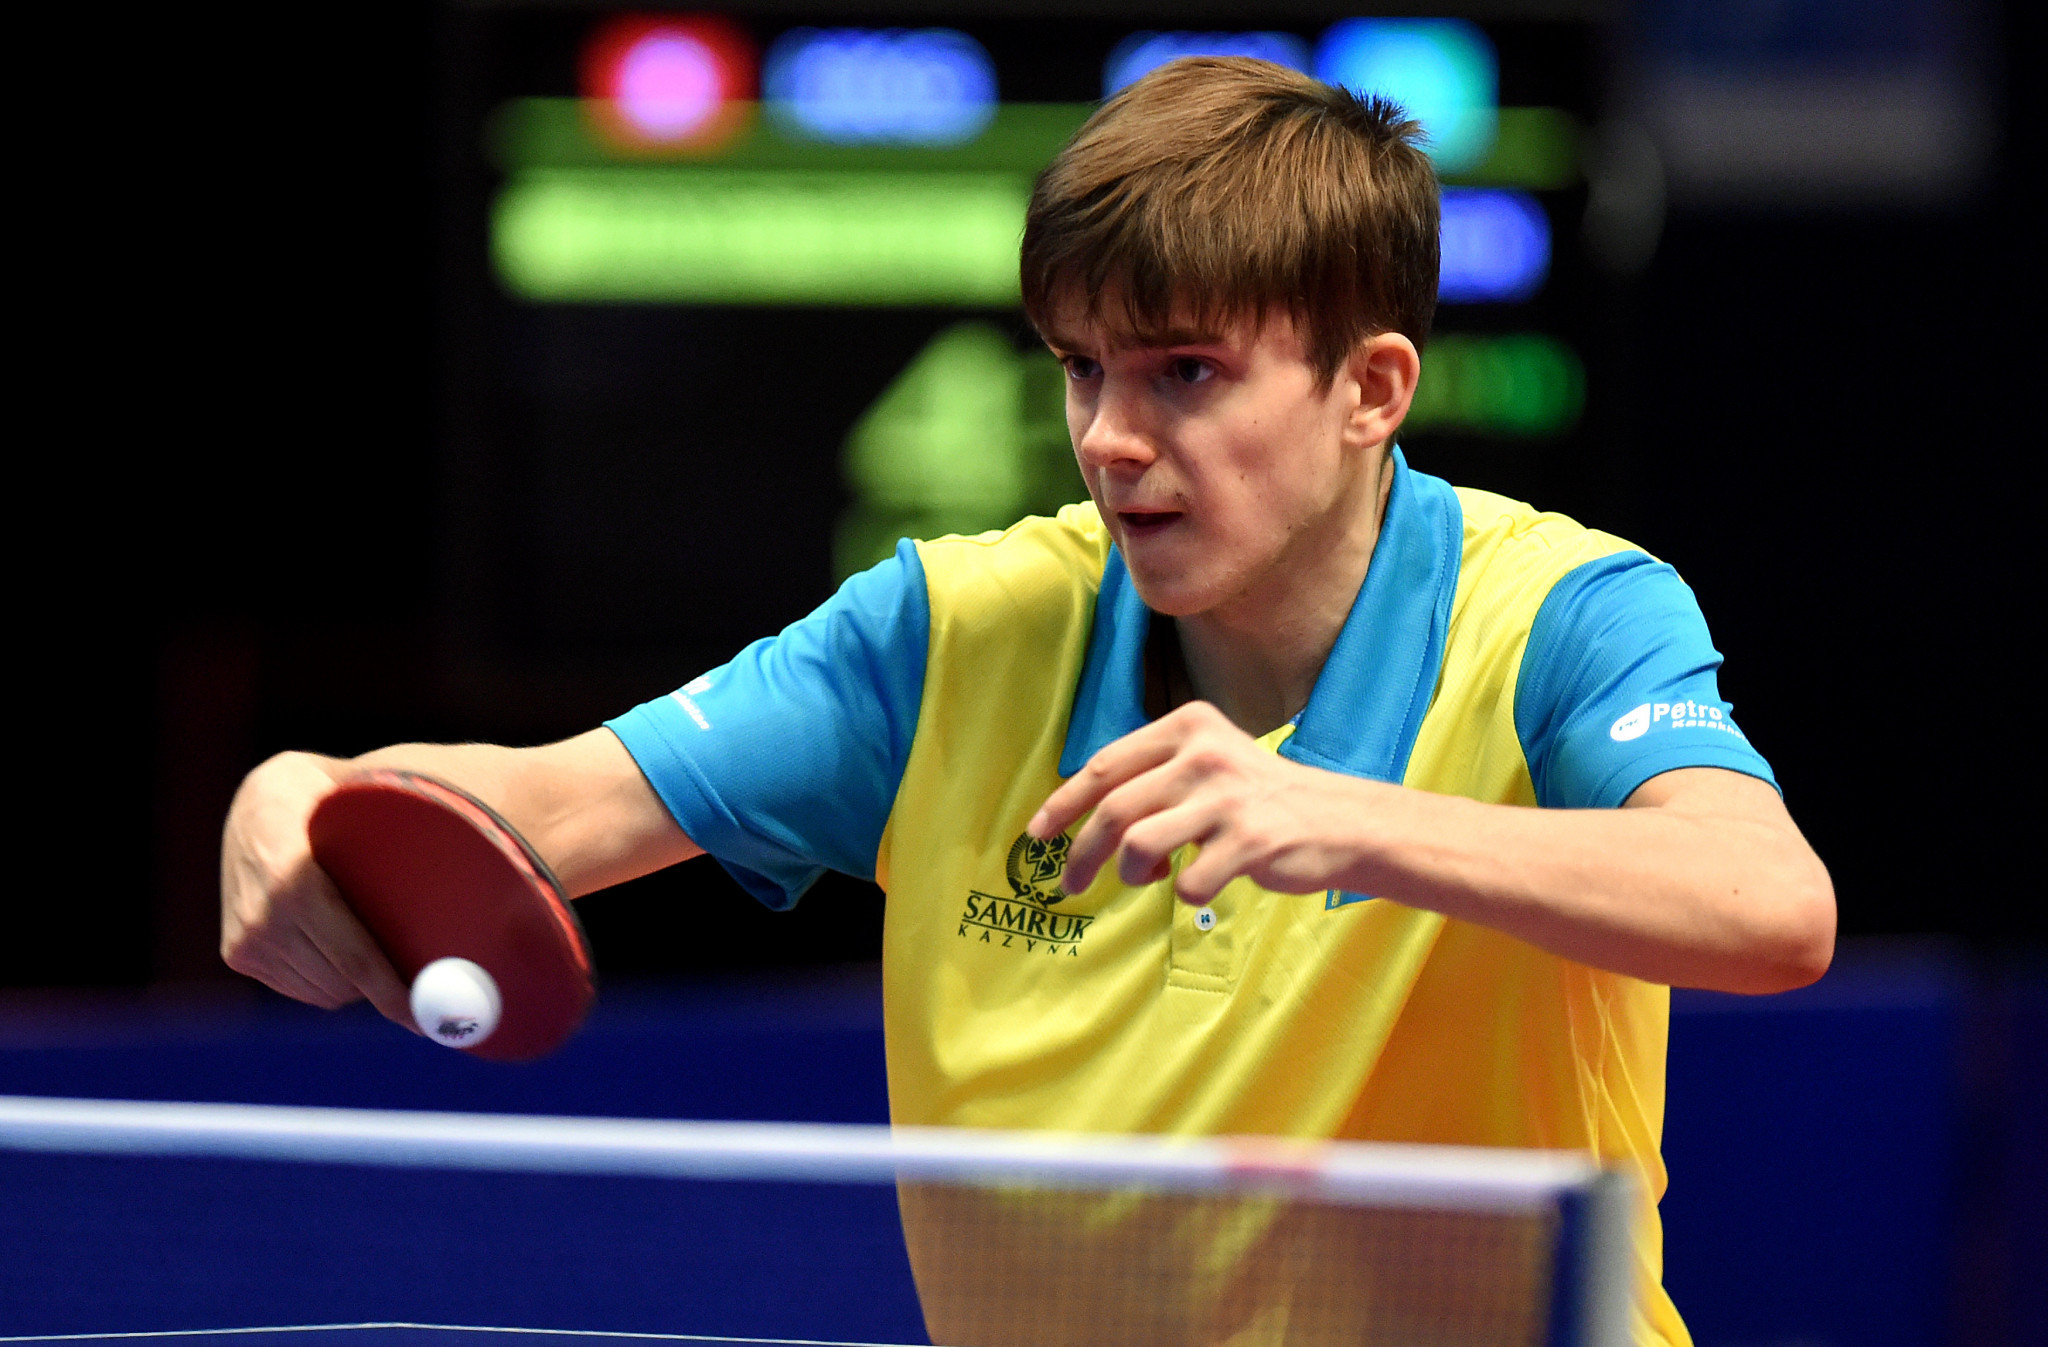 Central Asia top seed Kirill Gerassimenko of Kazakhstan won both his opening men's singles matches at the Asian Olympic Qualifying Tournament that started in Doha today ©Getty Images